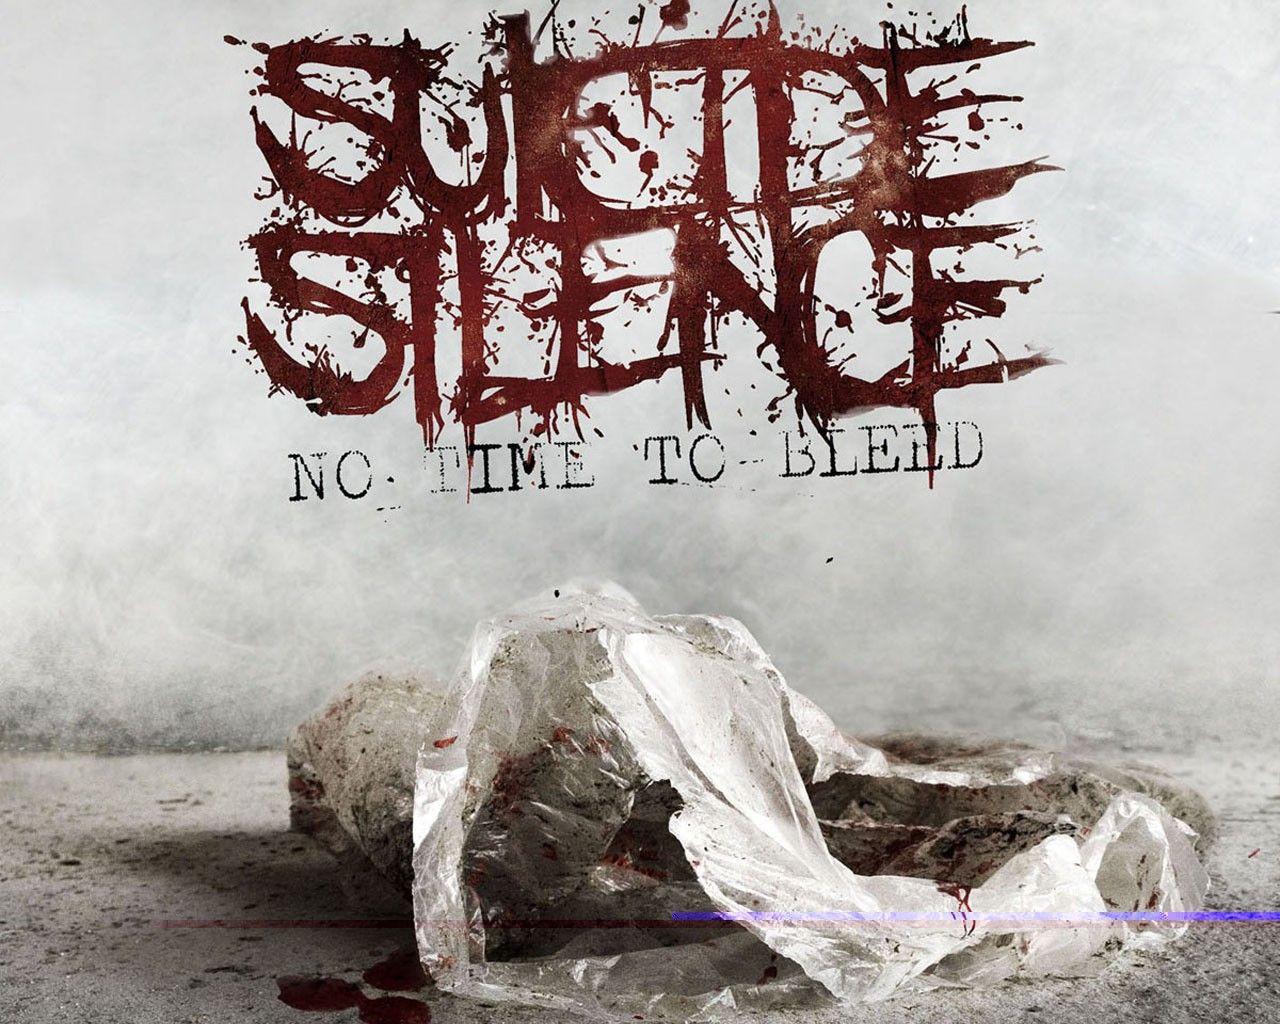 Wallpaper, drawing, snow, winter, Deathcore, Suicide Silence, No